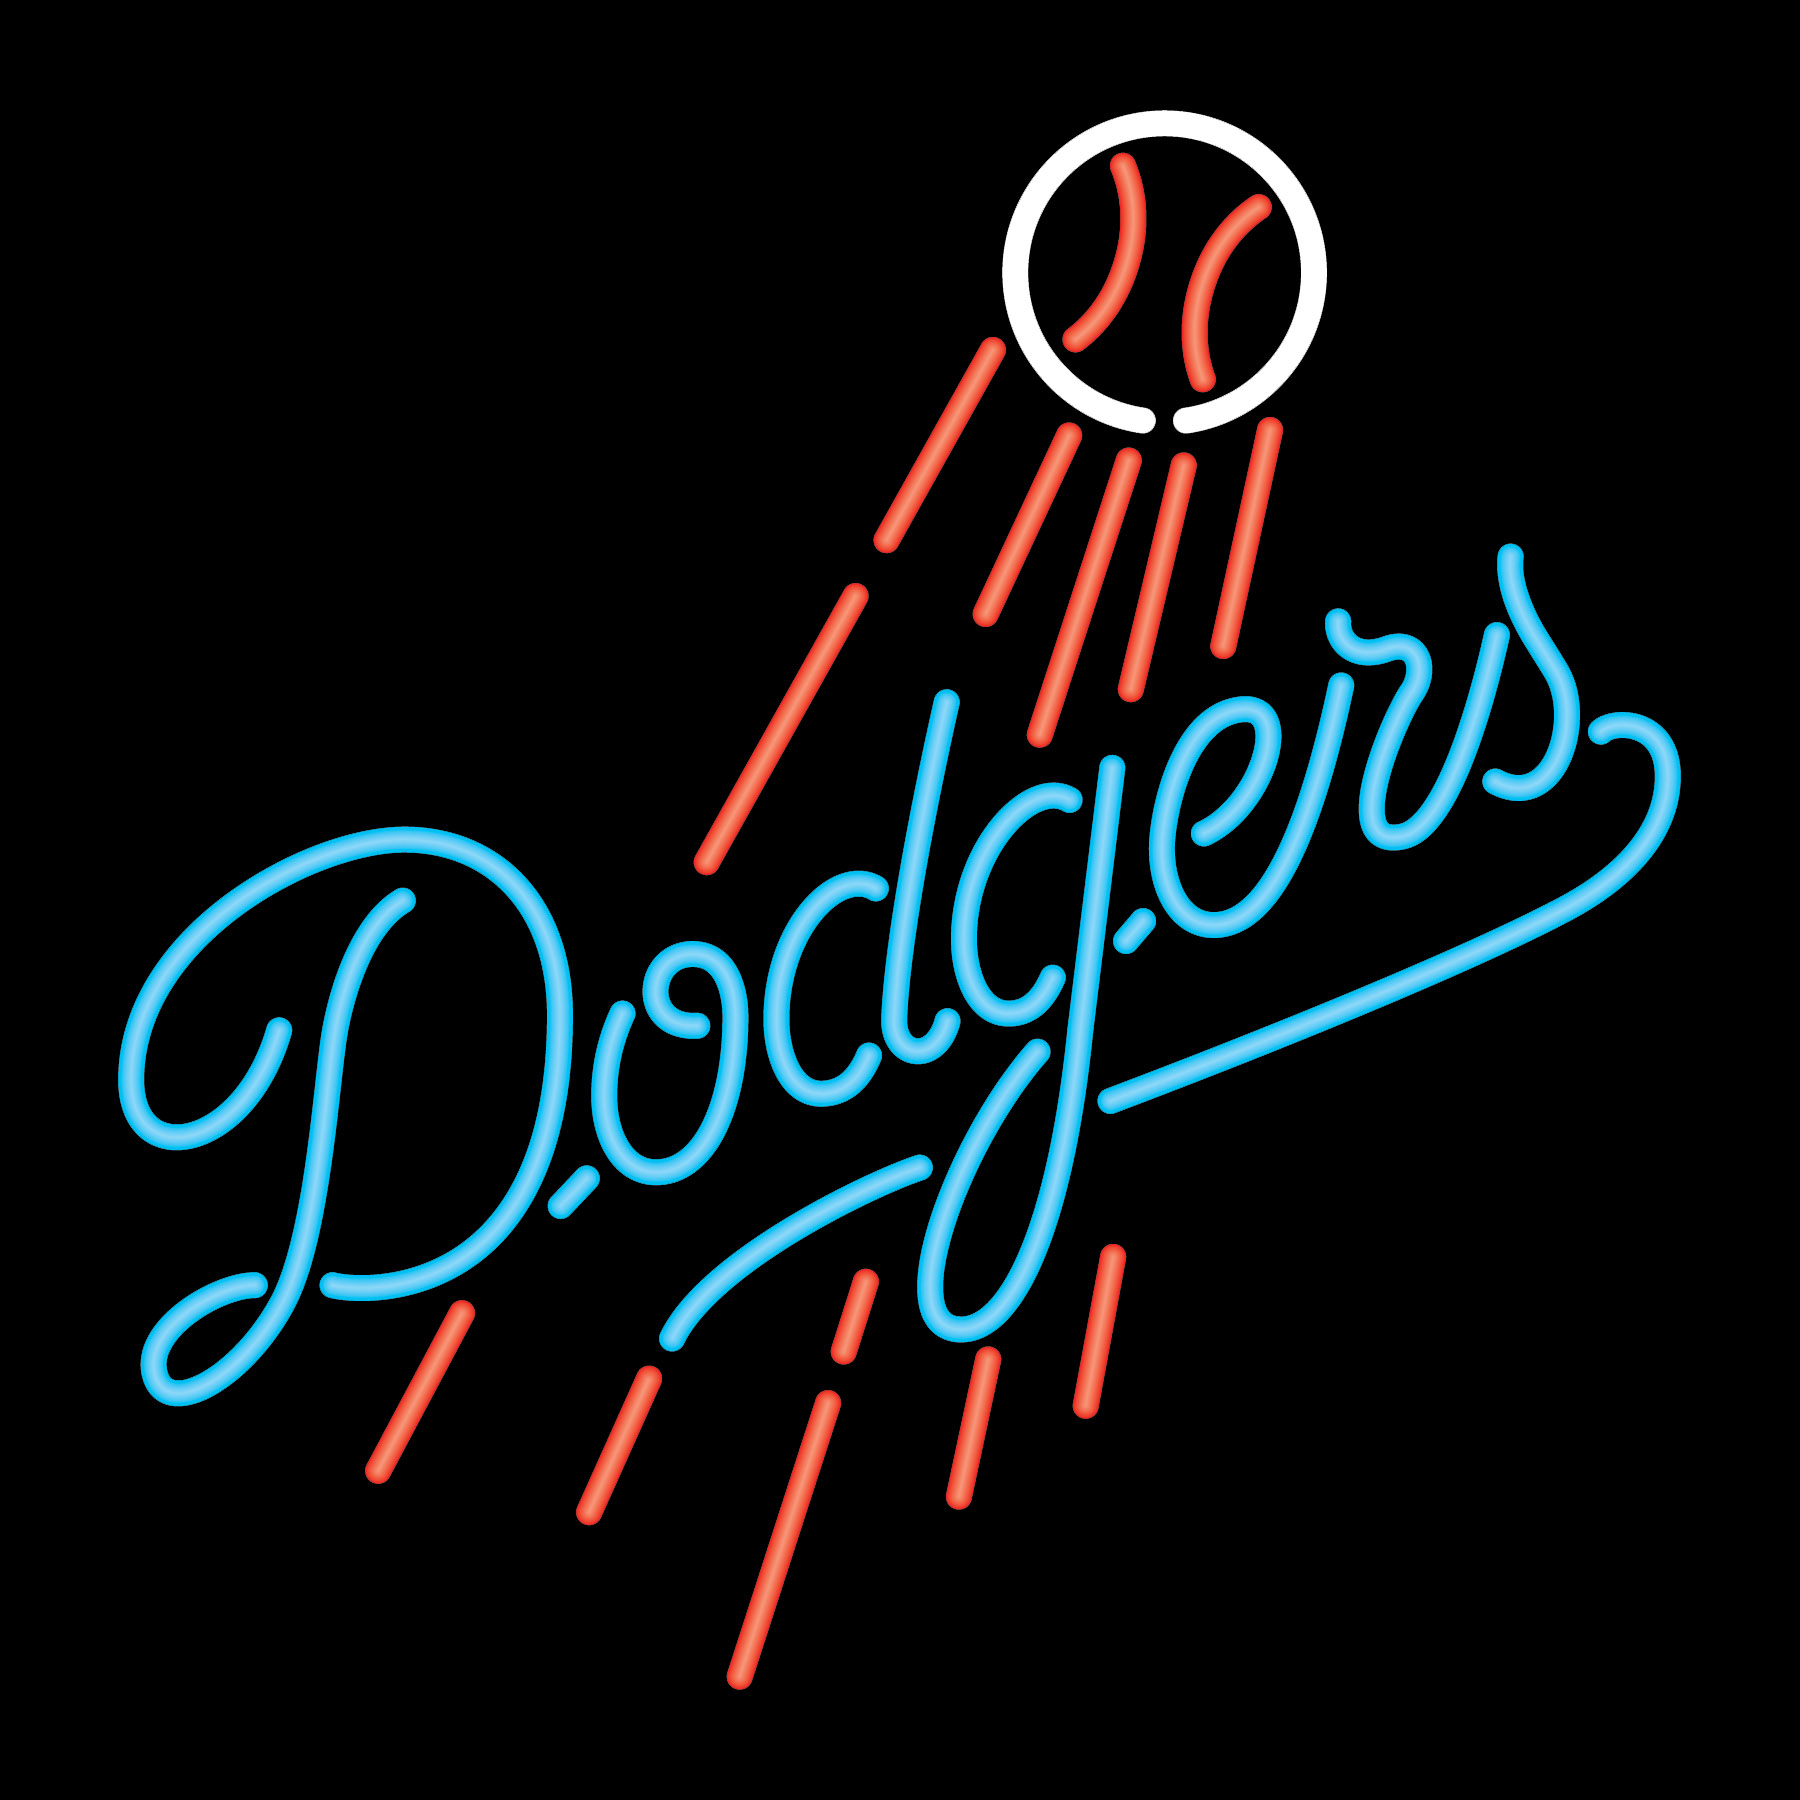 Dodgers Wallpaper For Home